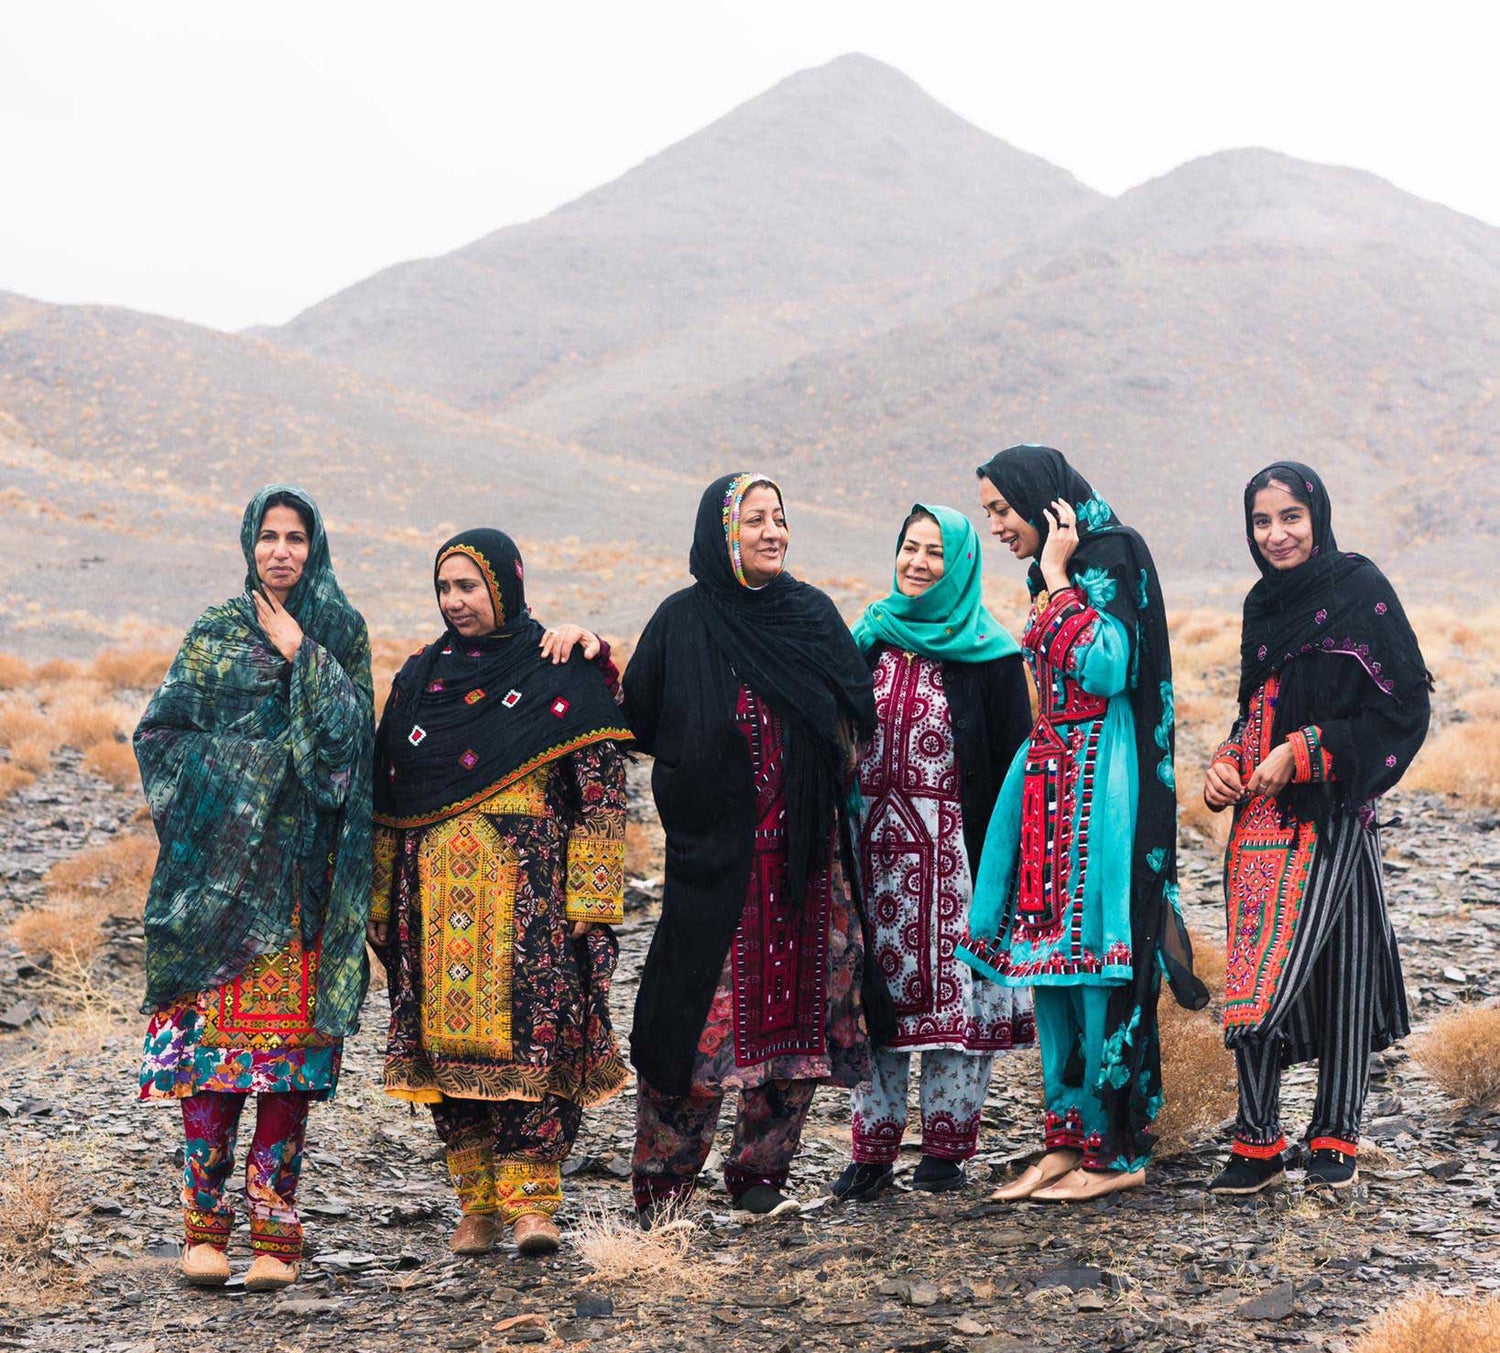 Laneh Baluchistan women embroiderers laughing in front of a mountain